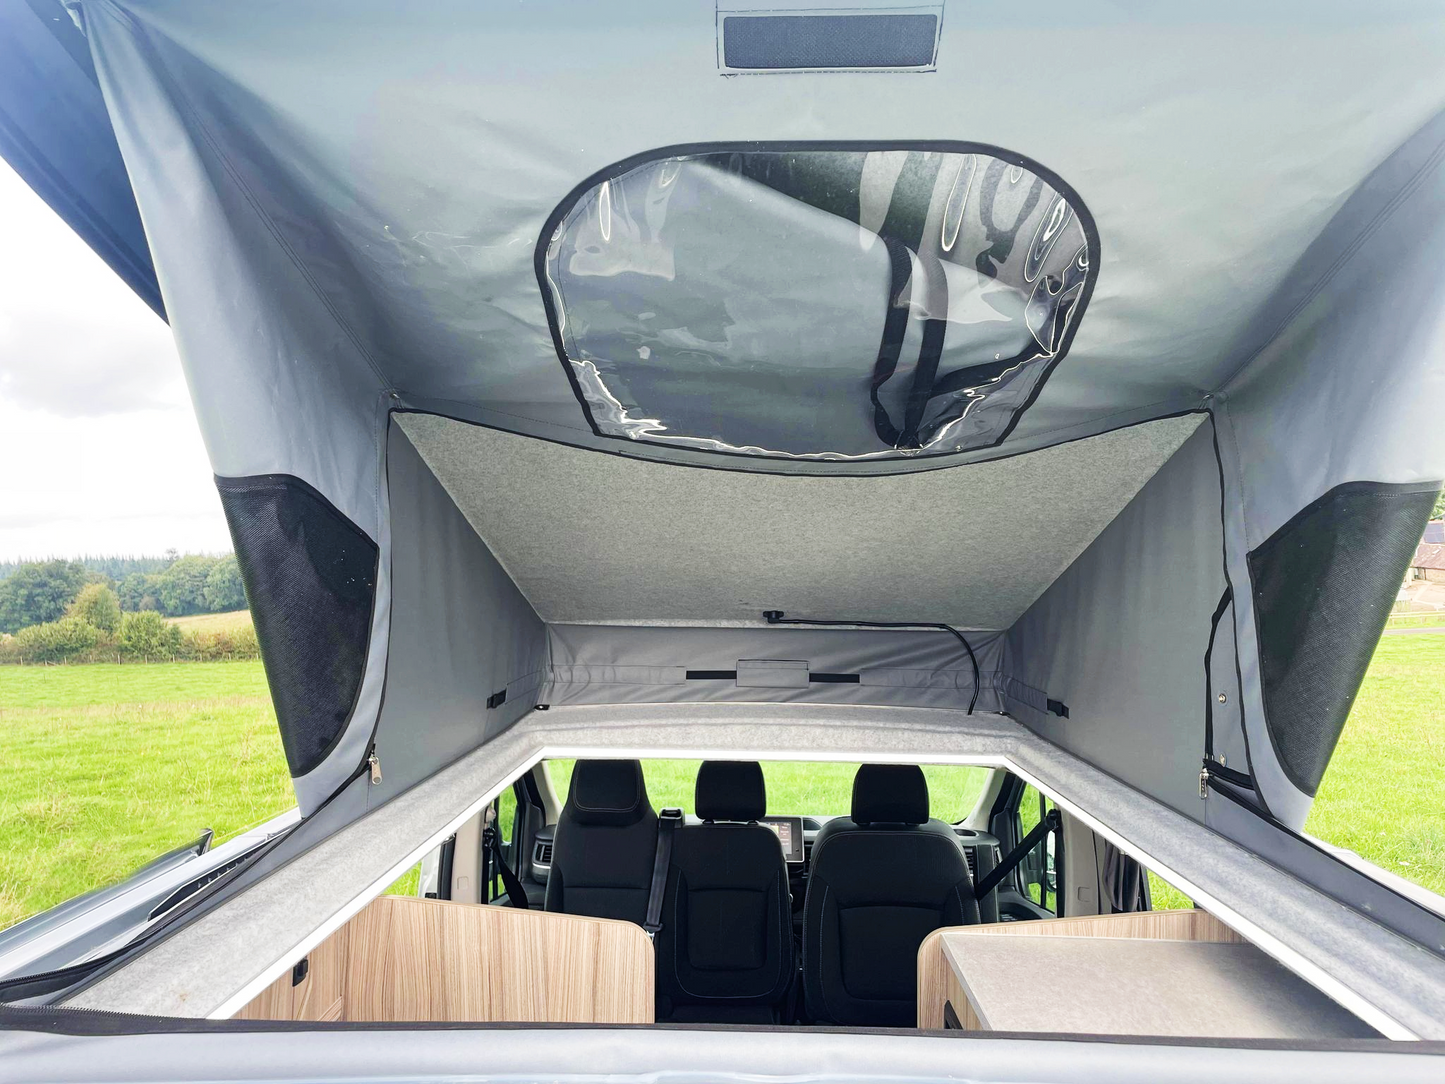 The Witley Camper Van Conversion for the Vauxhall Vivaro, Renault Trafic, Nissan NV300 Fiat Talento with up to  six 6 traveling seat camper - cccampers.myshopify.com